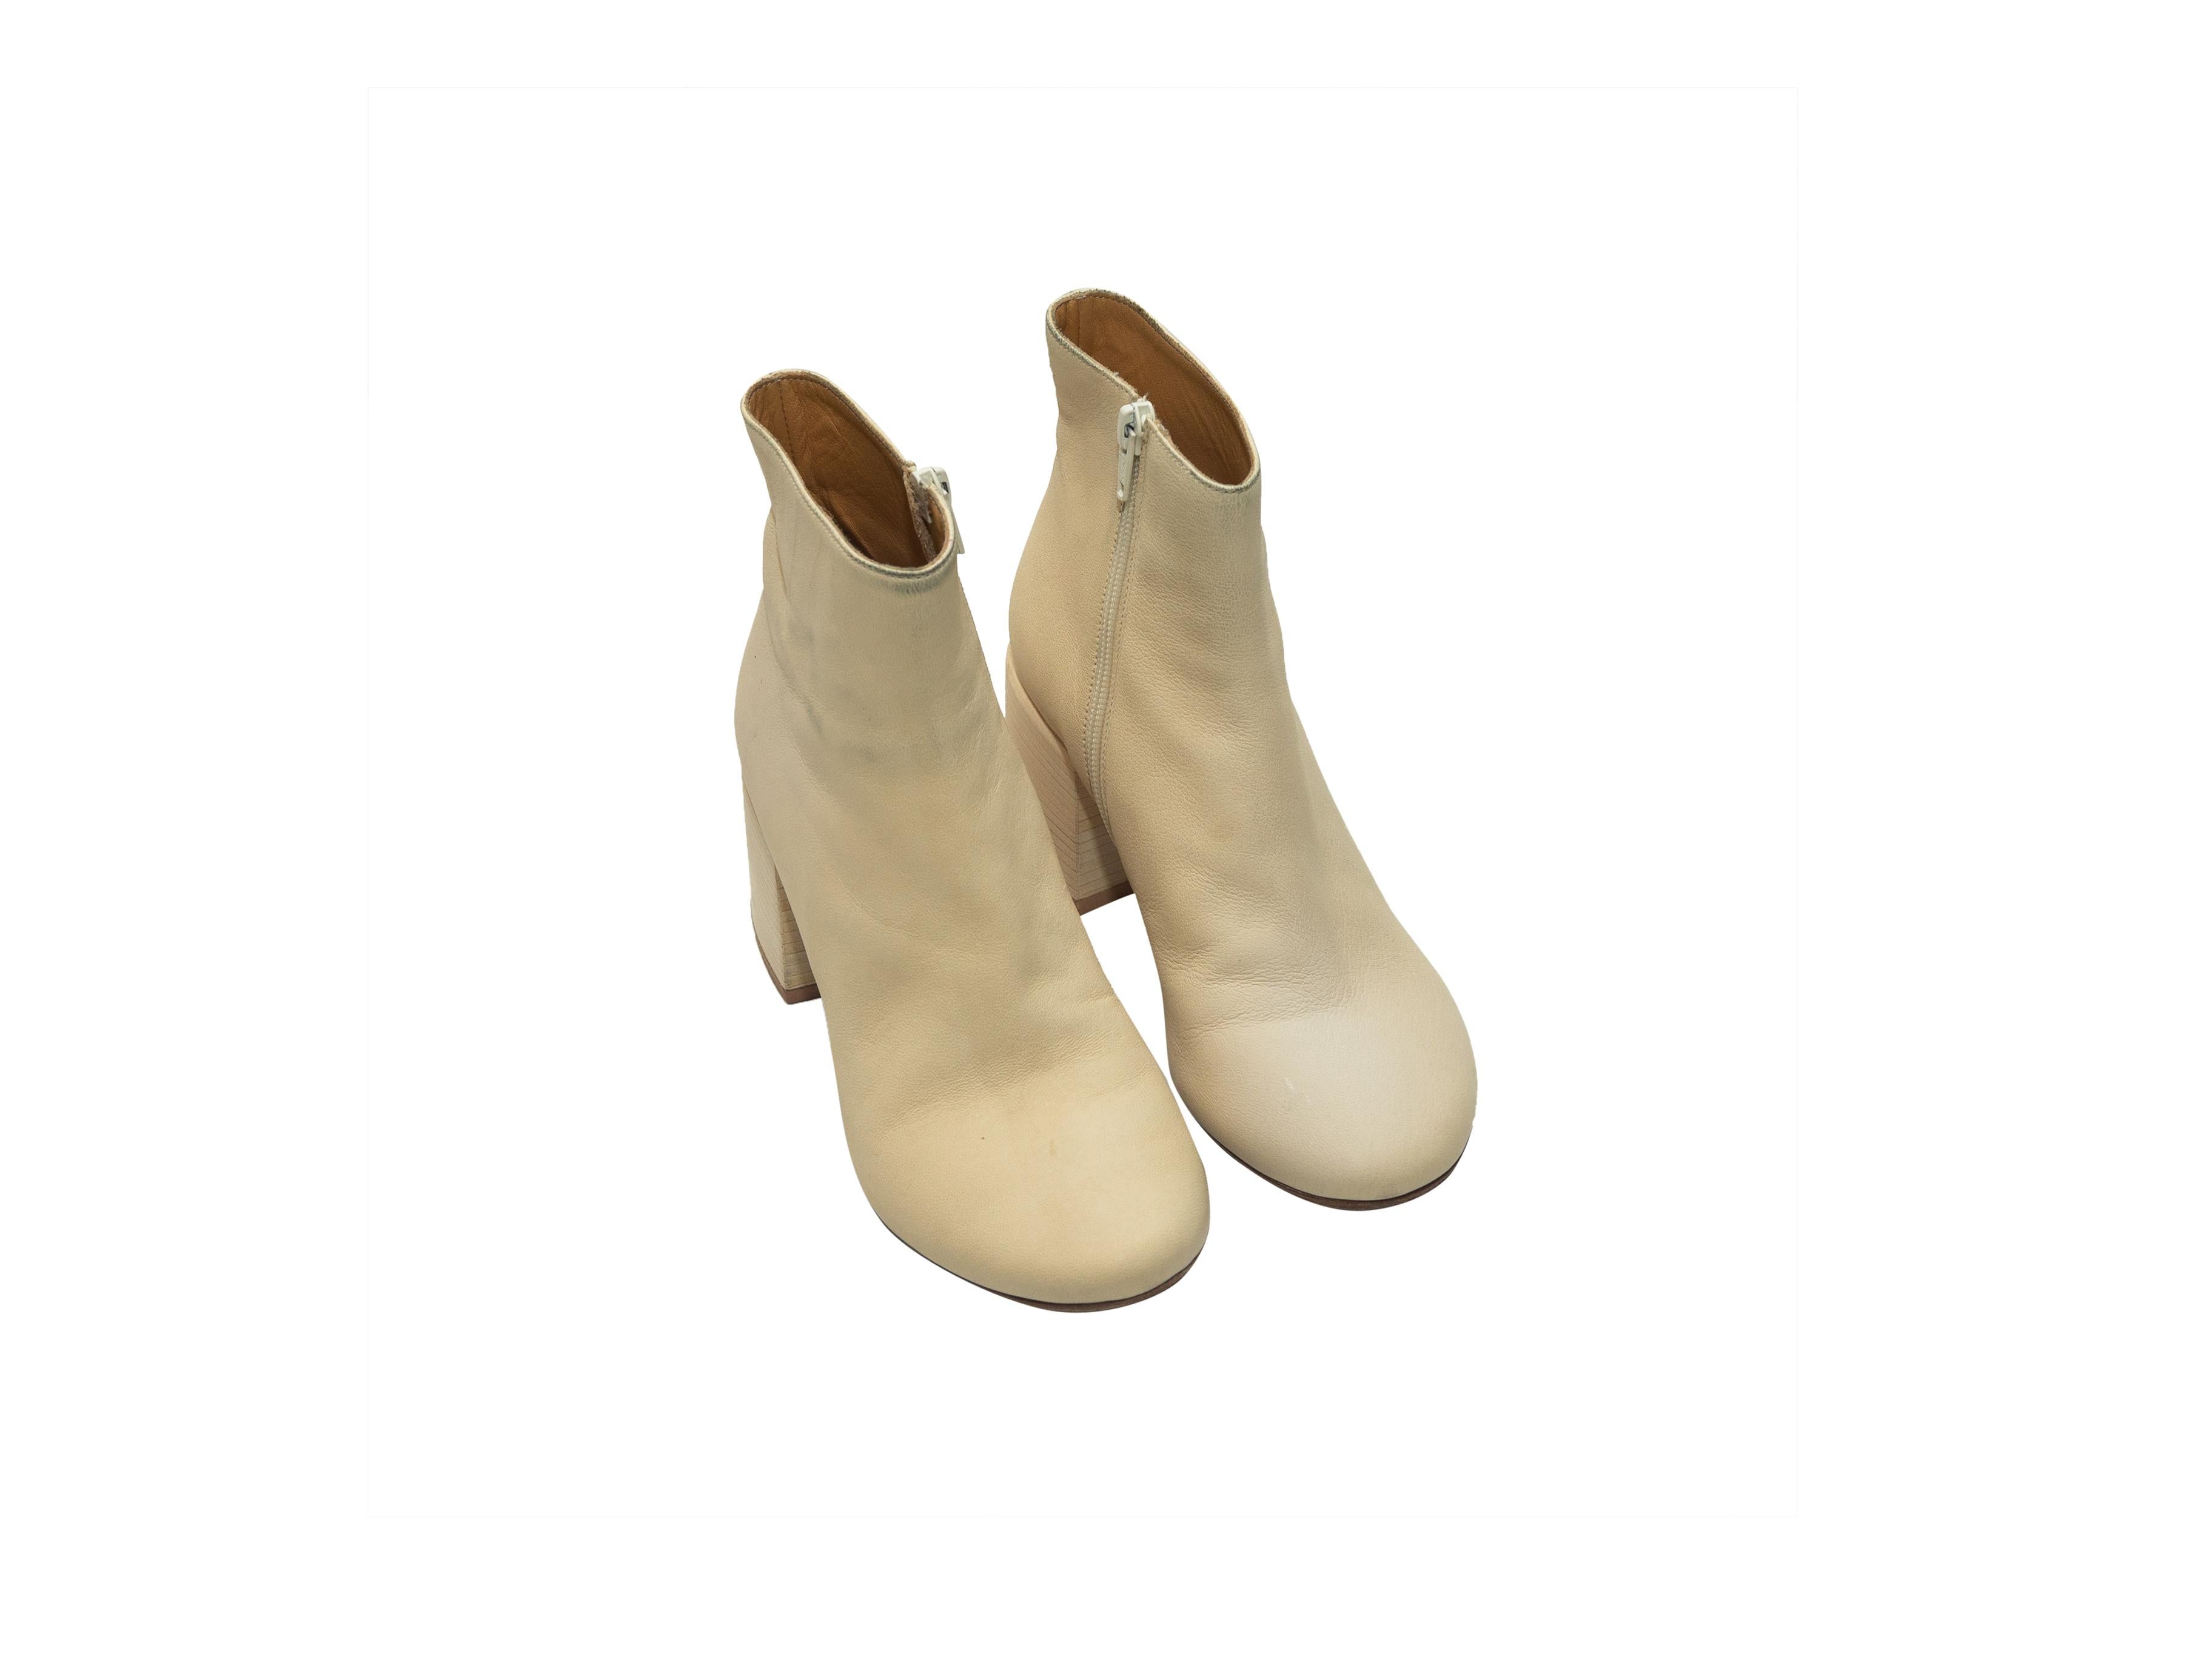 Product details: Cream leather round-toe ankle boots by MM6 Maison Margiela. Stacked heels. Zip closures at inner sides. Designer size 37. 3